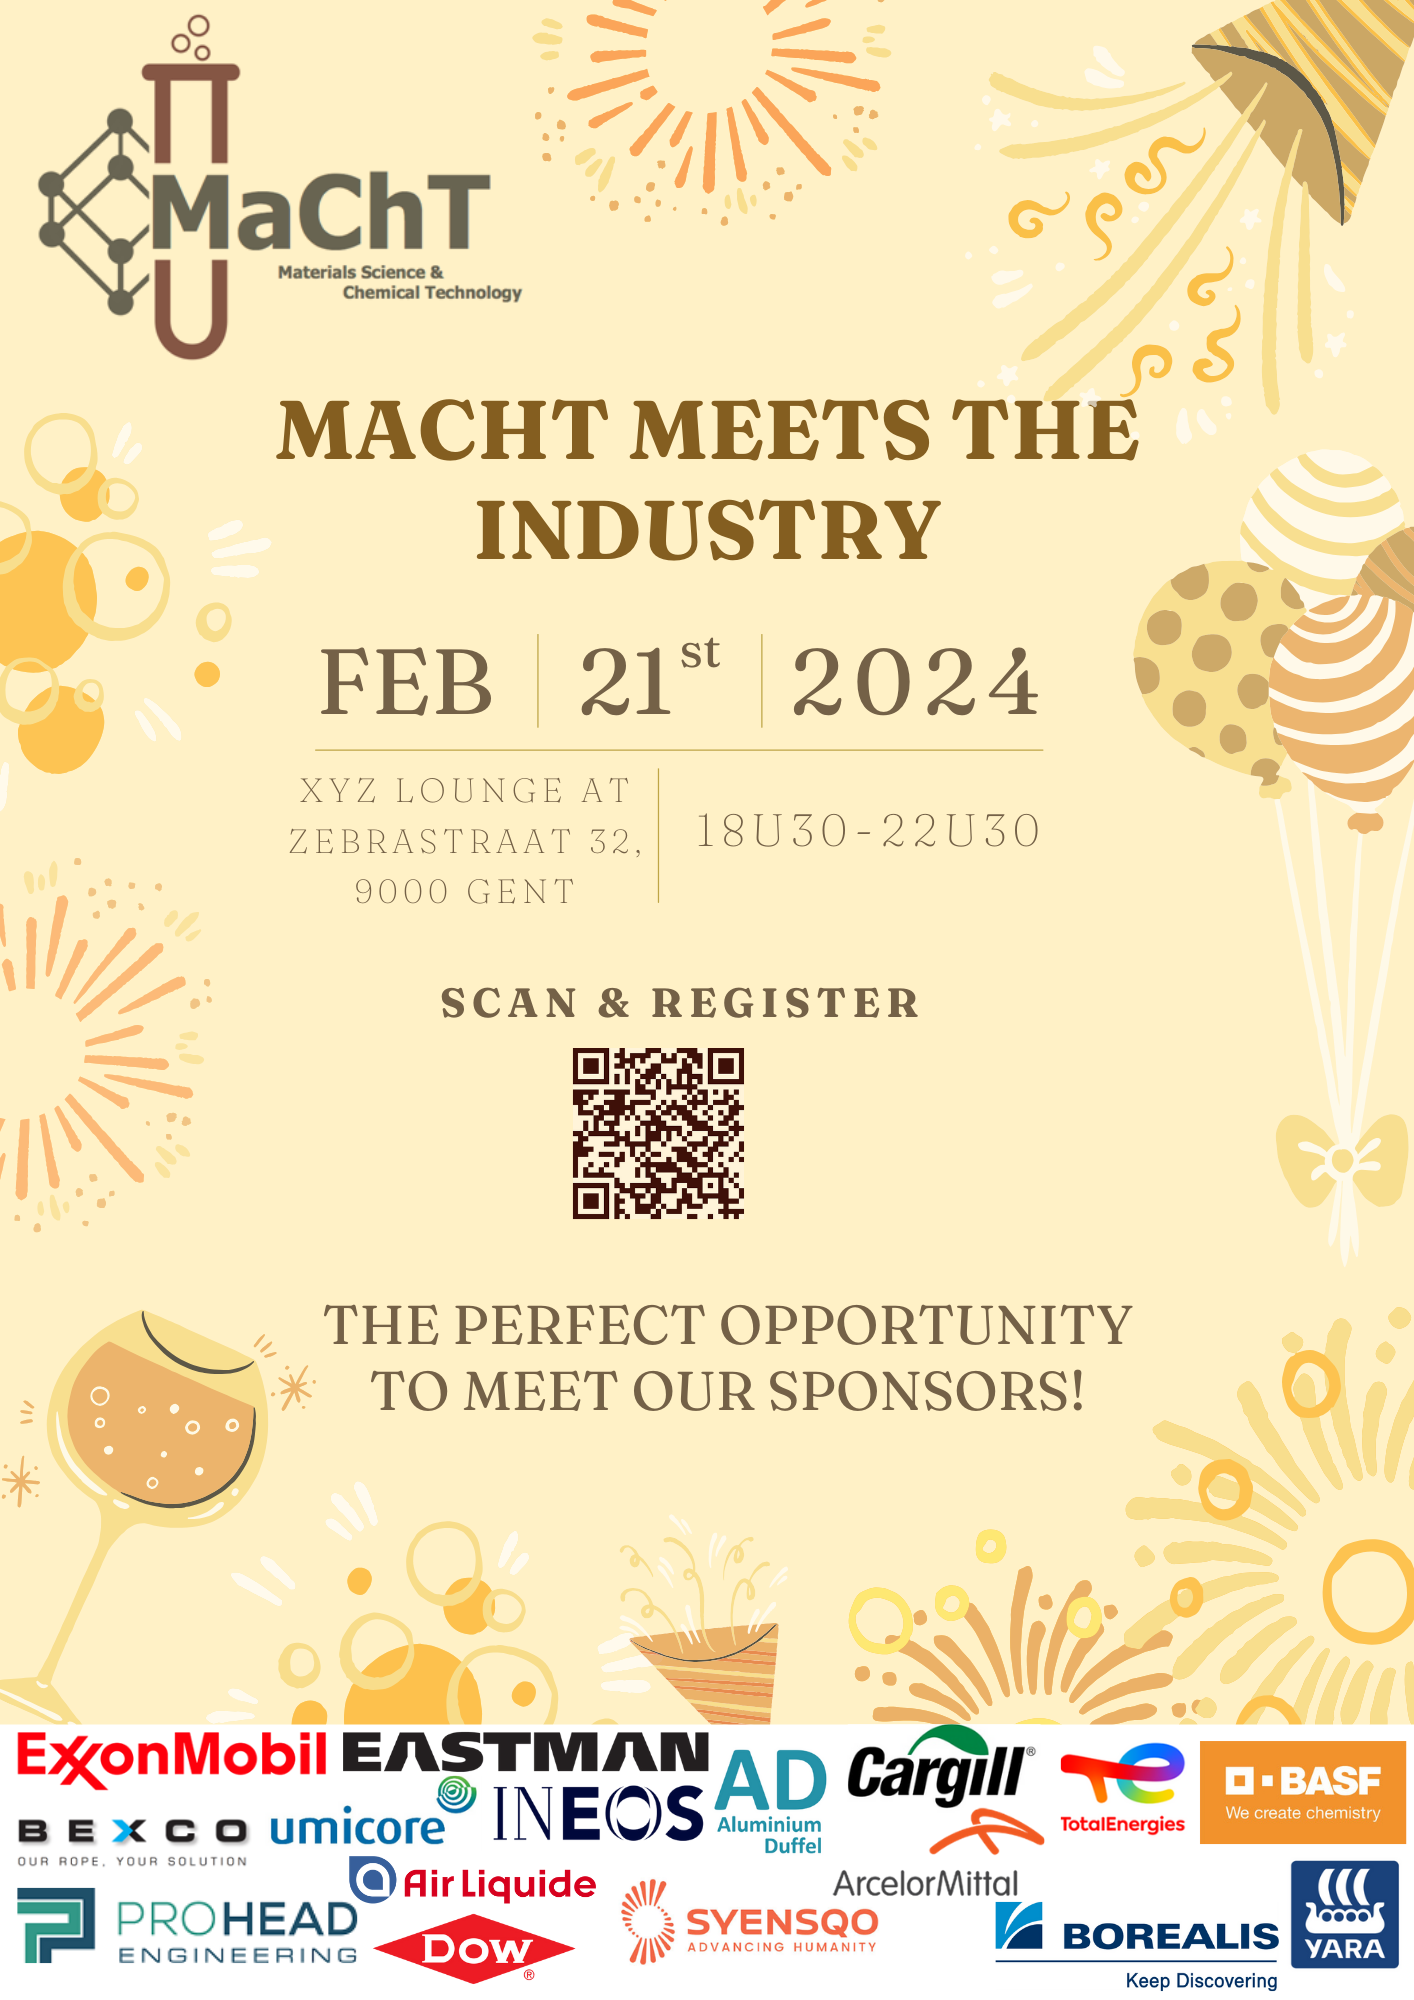 MaChT Meets the Industry